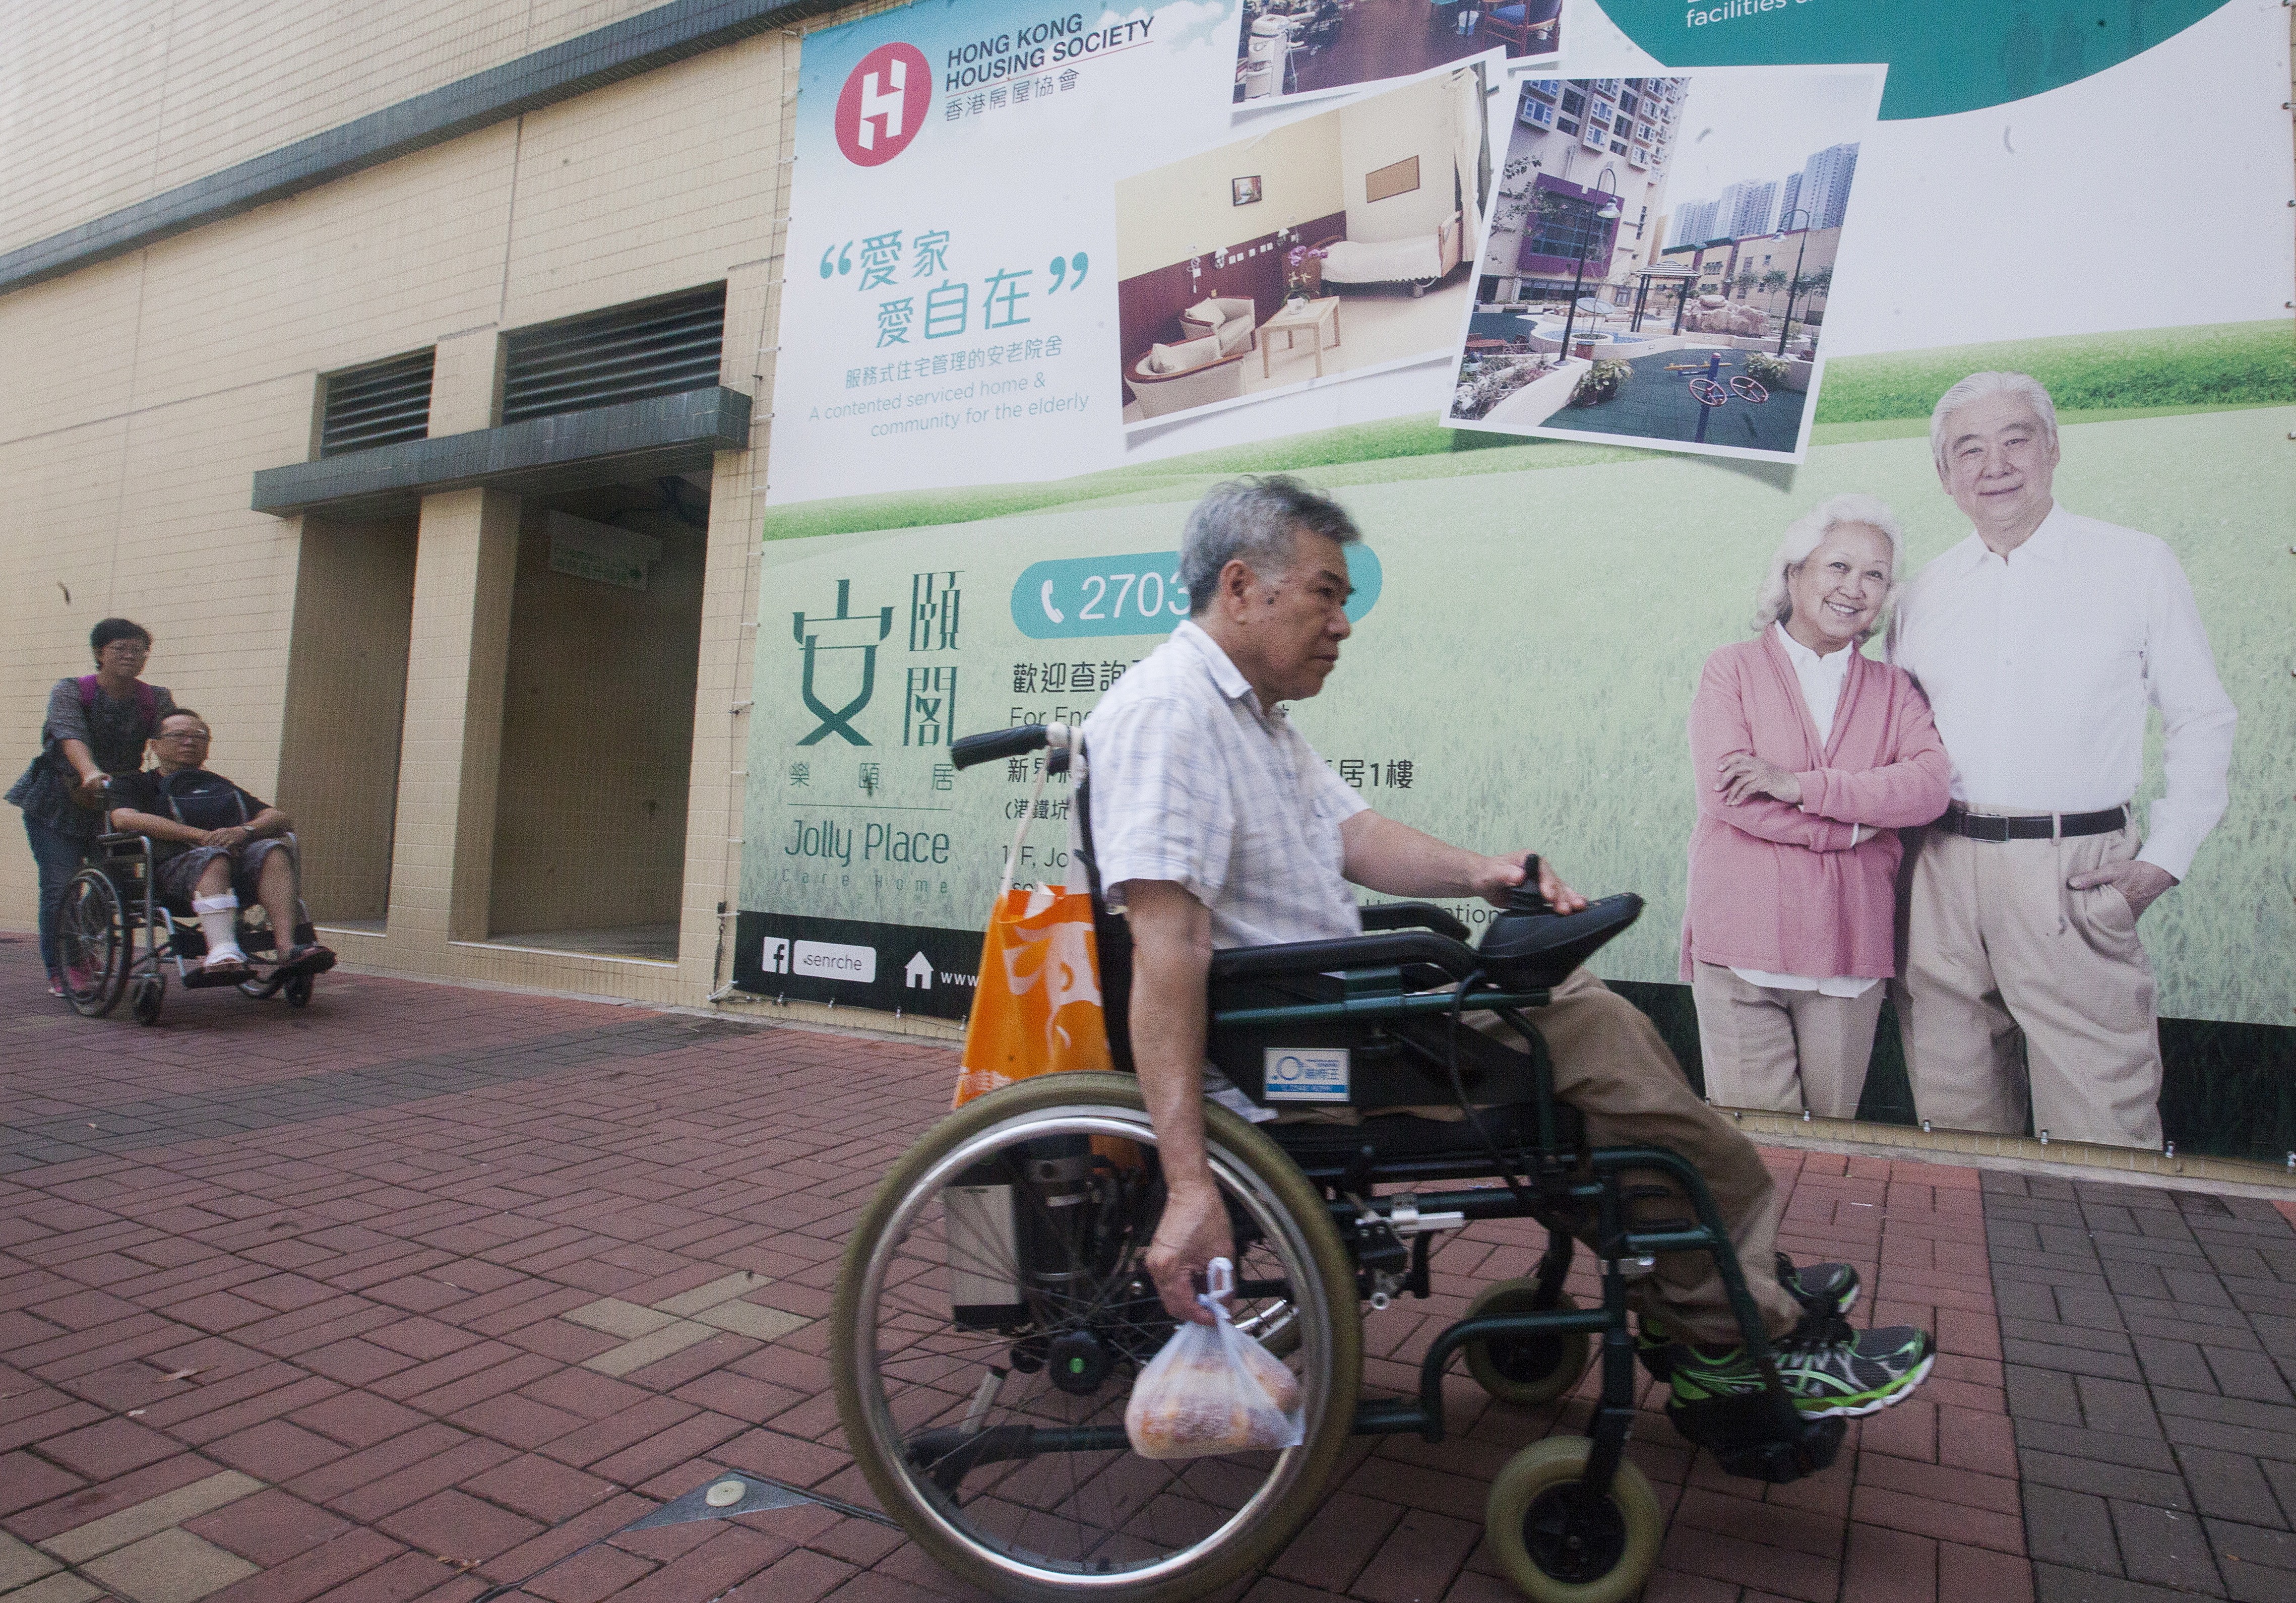 A third of Hong Kong residents are predicted to be aged 65 or over by 2041. Photo: EPA